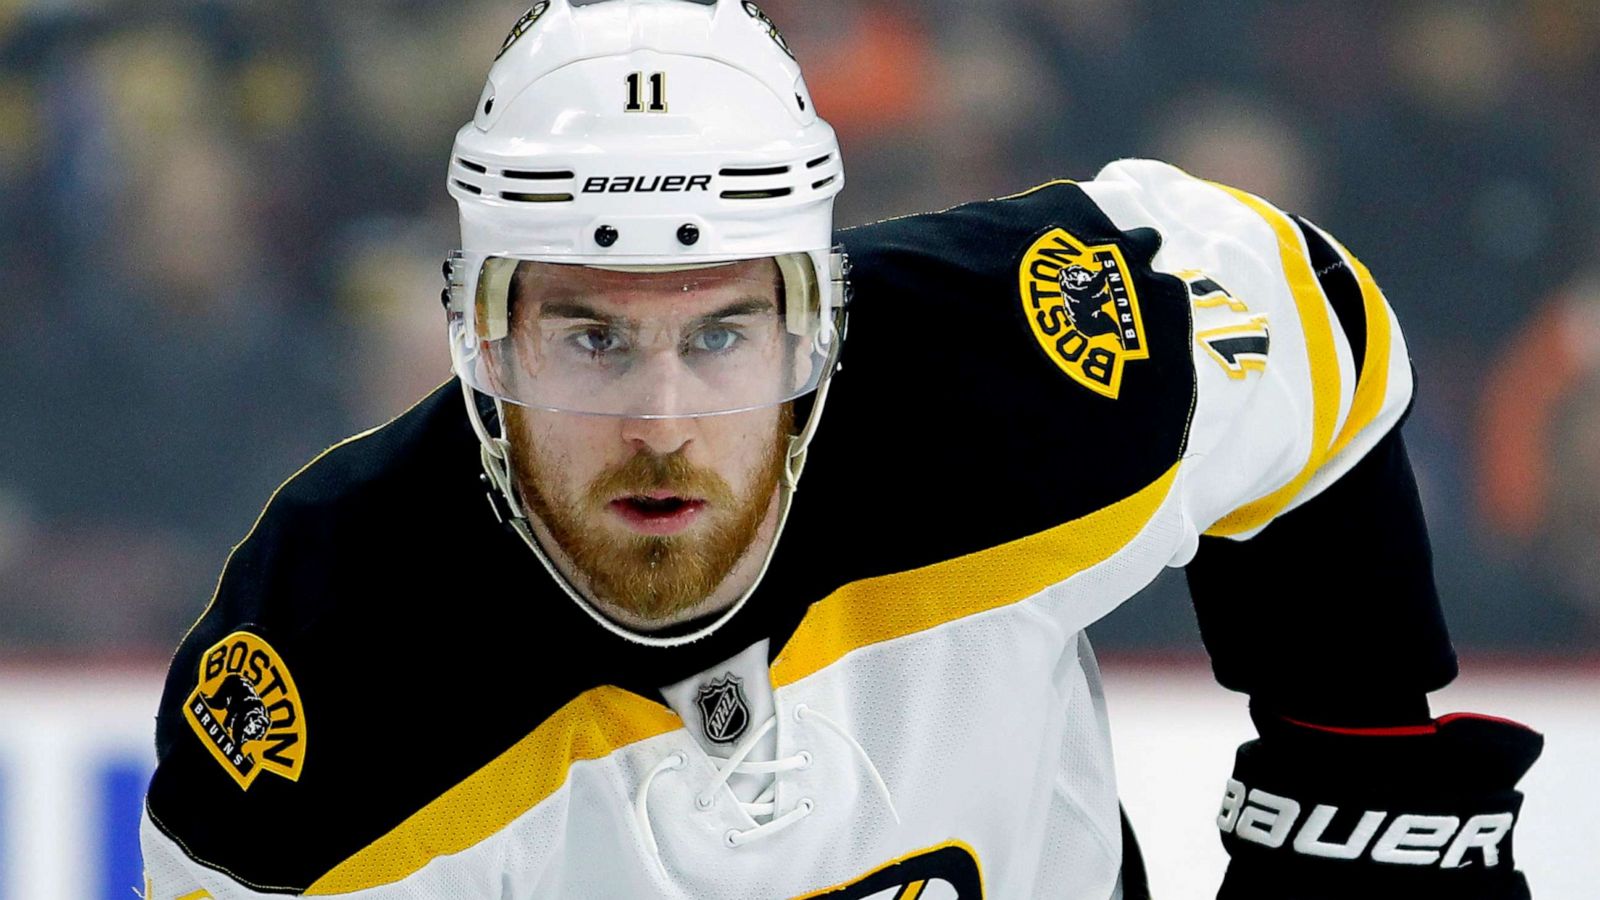 NHL player Jimmy Hayes' death highlights spike in fentanyl-related